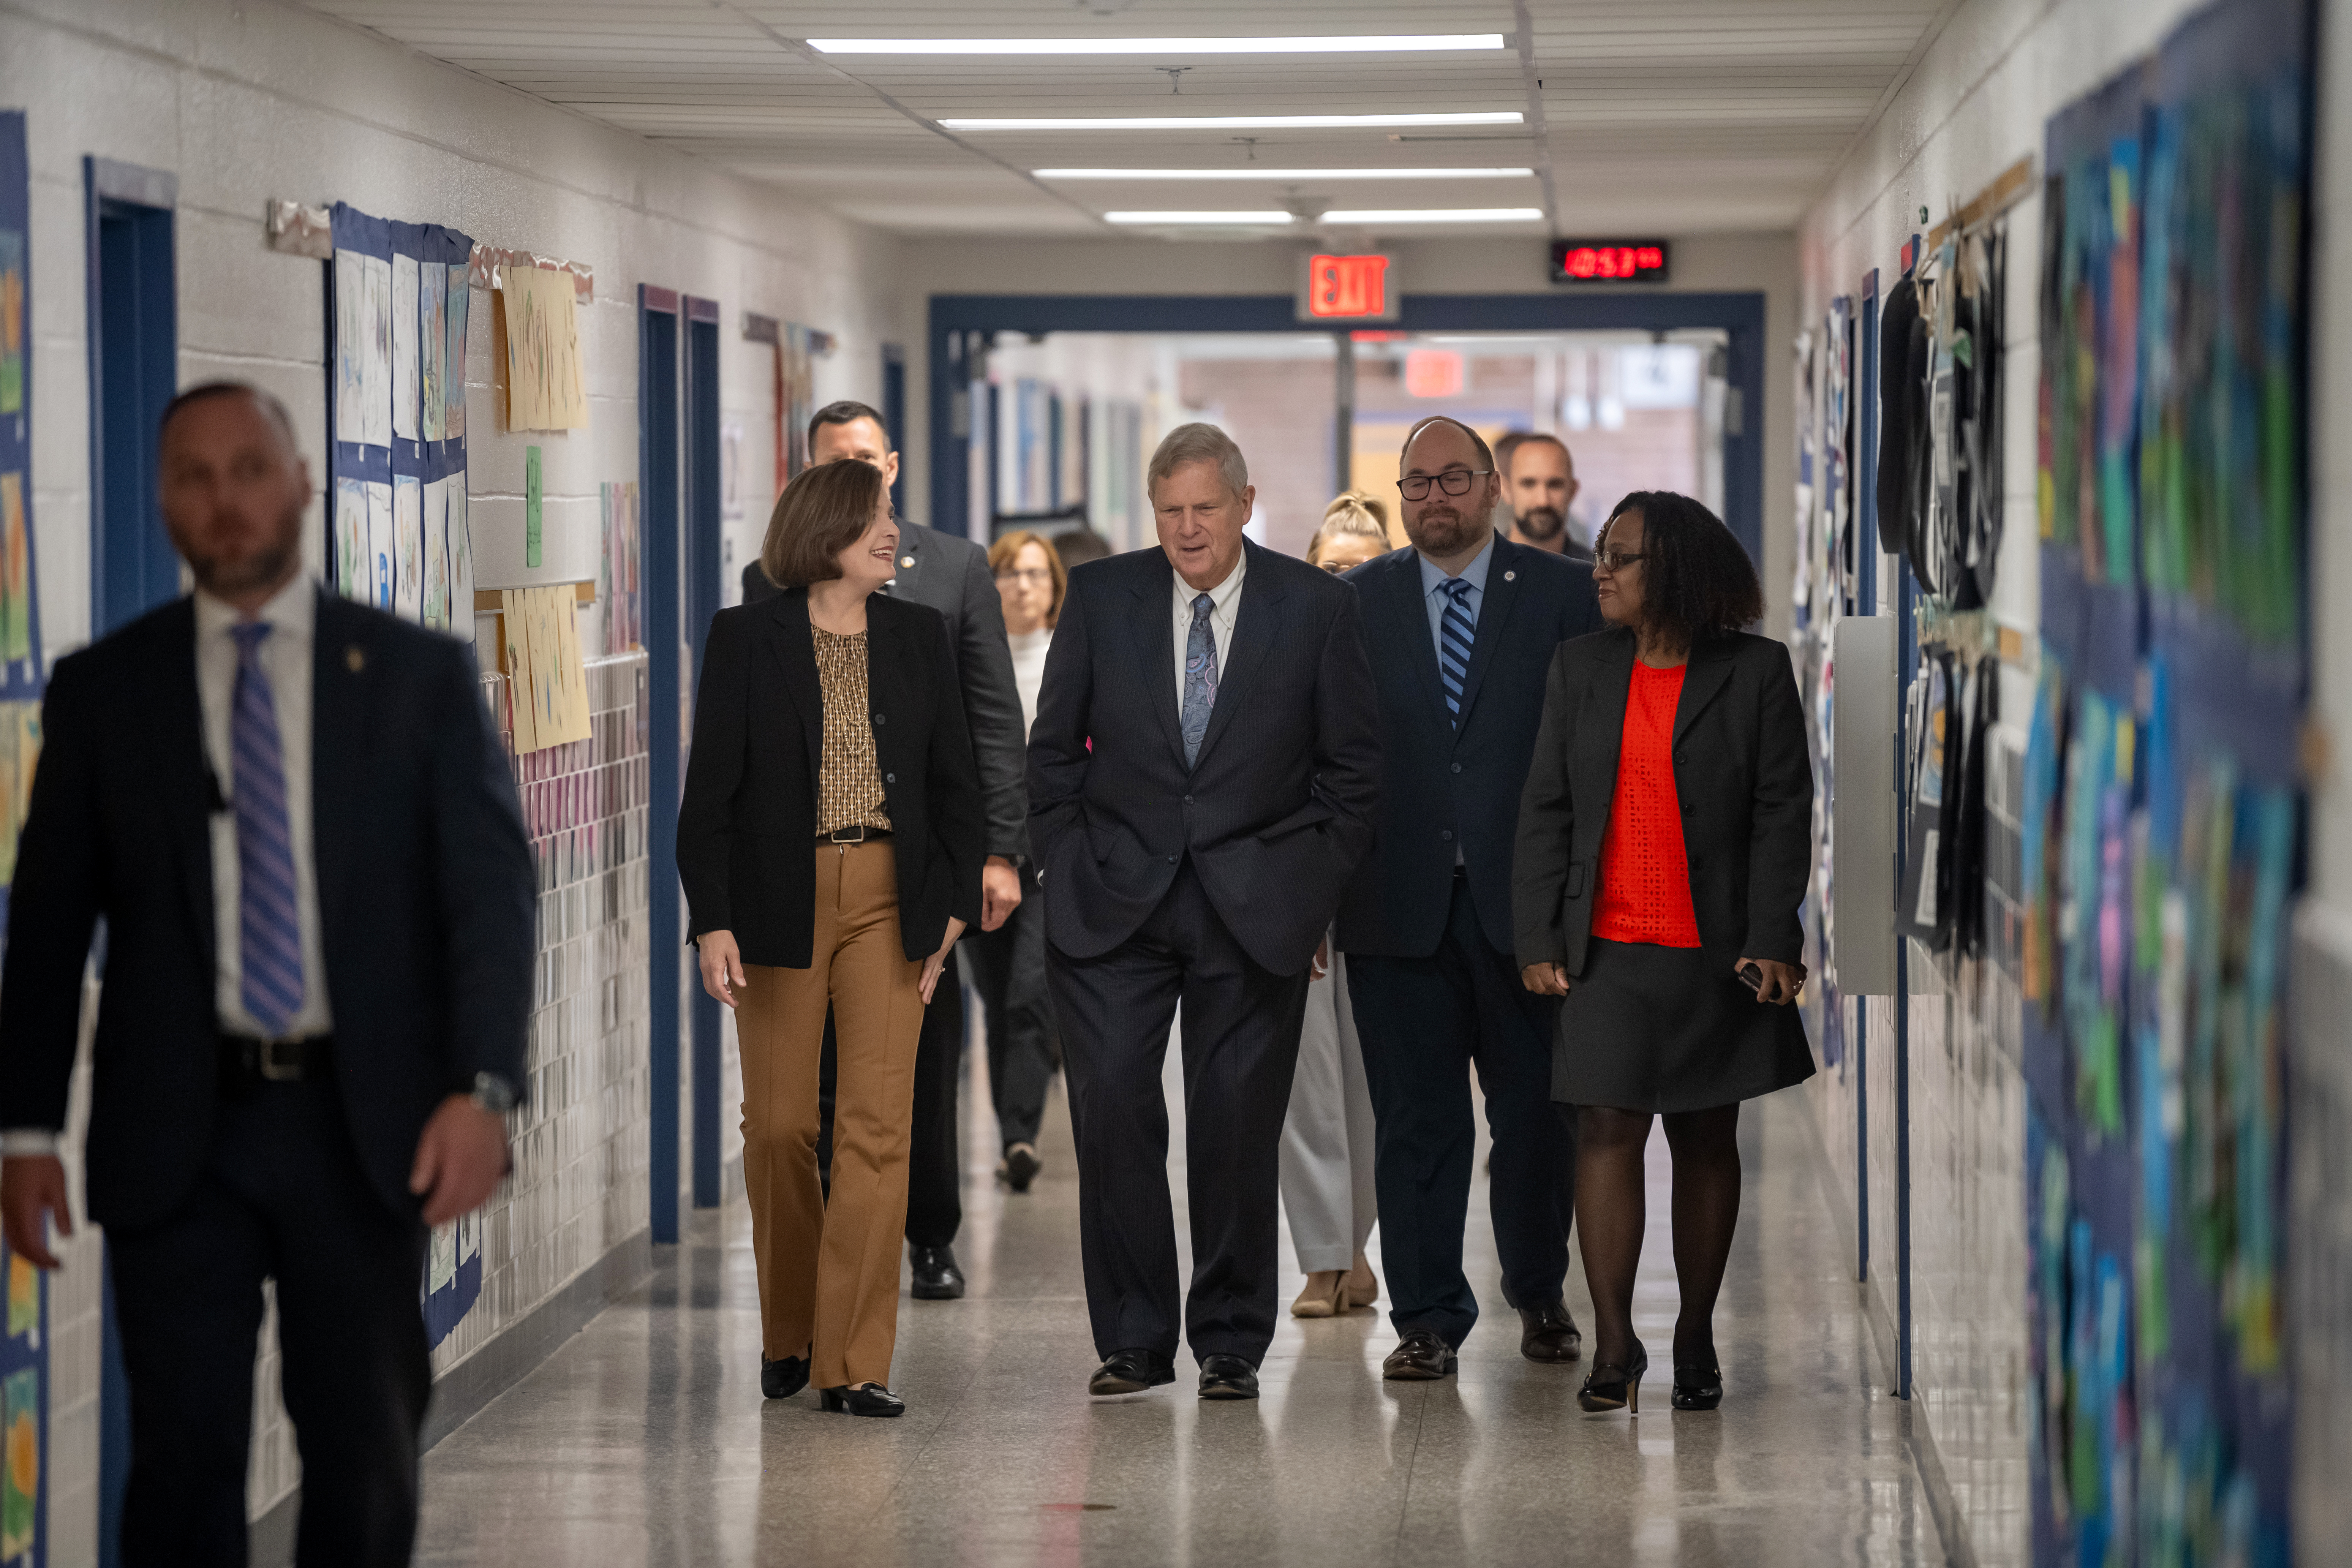 USDA Secretary Vilsack meets Fairfax County School Board Vice-Chair Karl Frisch and Mason District Representative Ricardy Anderson during a tour led by Annandale Terrace ES Principal Ingrid Badia.